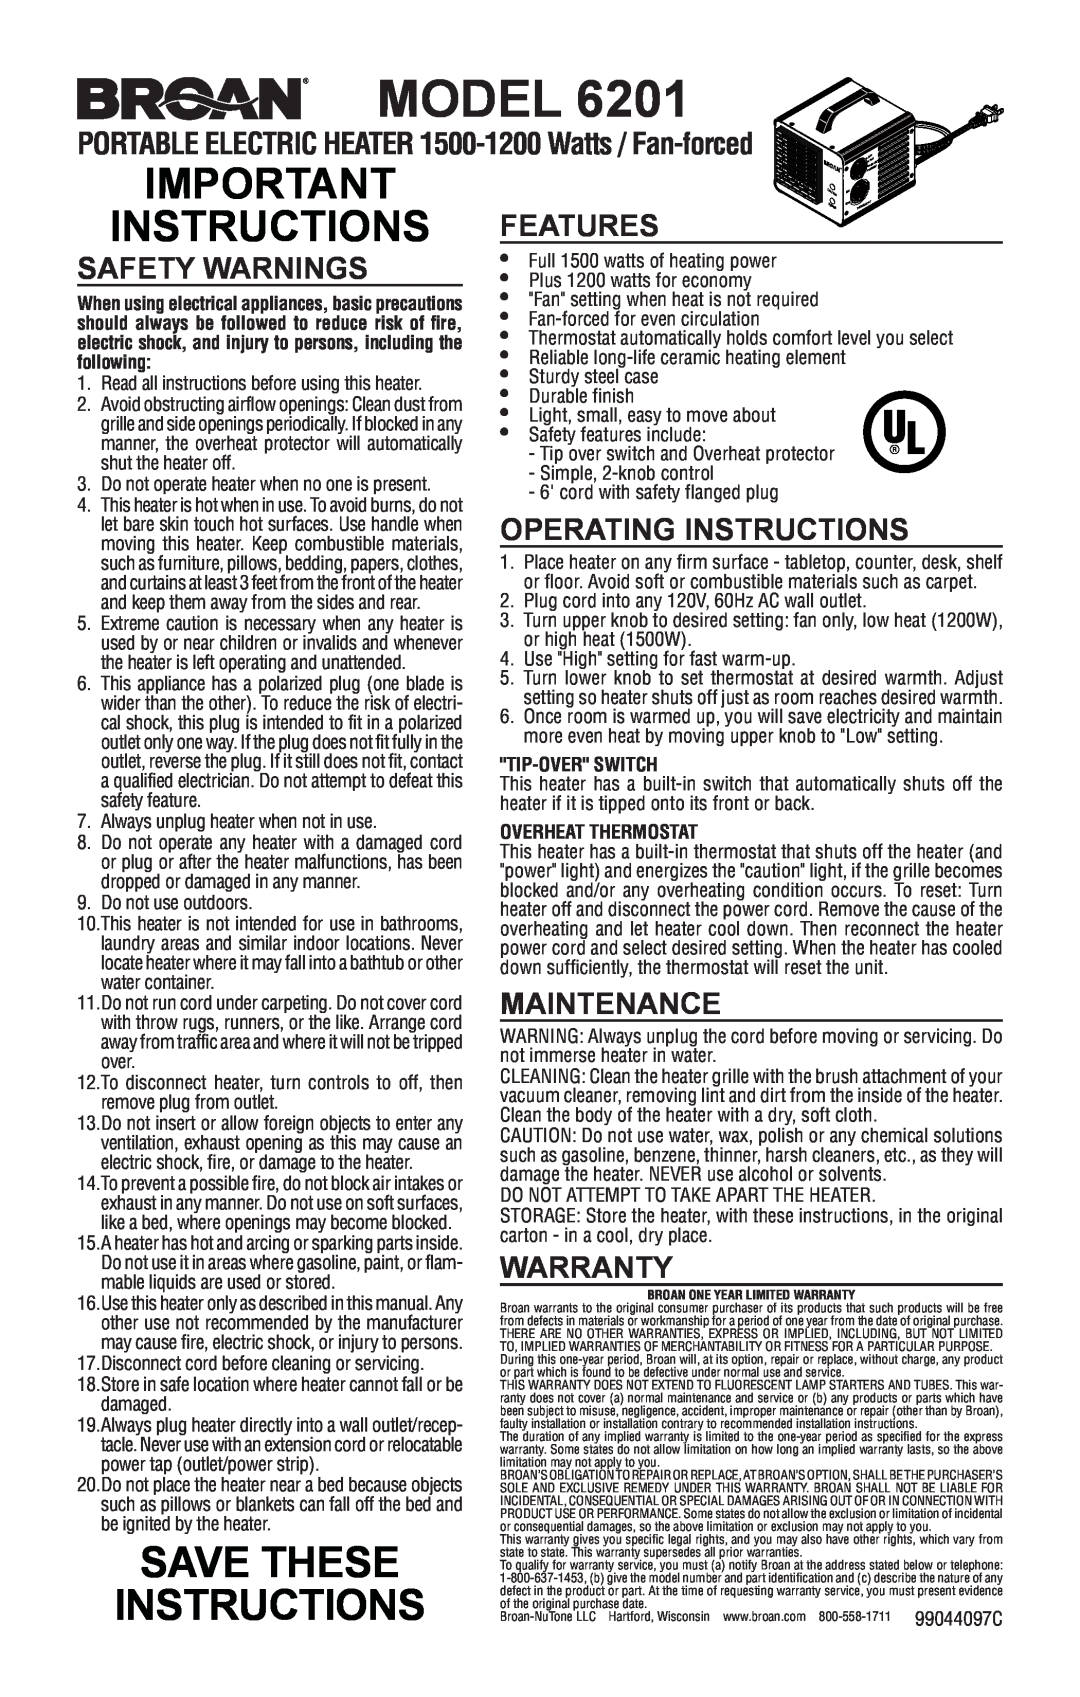 Broan 6201 warranty Model, Important Instructions Features, Save These Instructions, Safety Warnings, Maintenance 